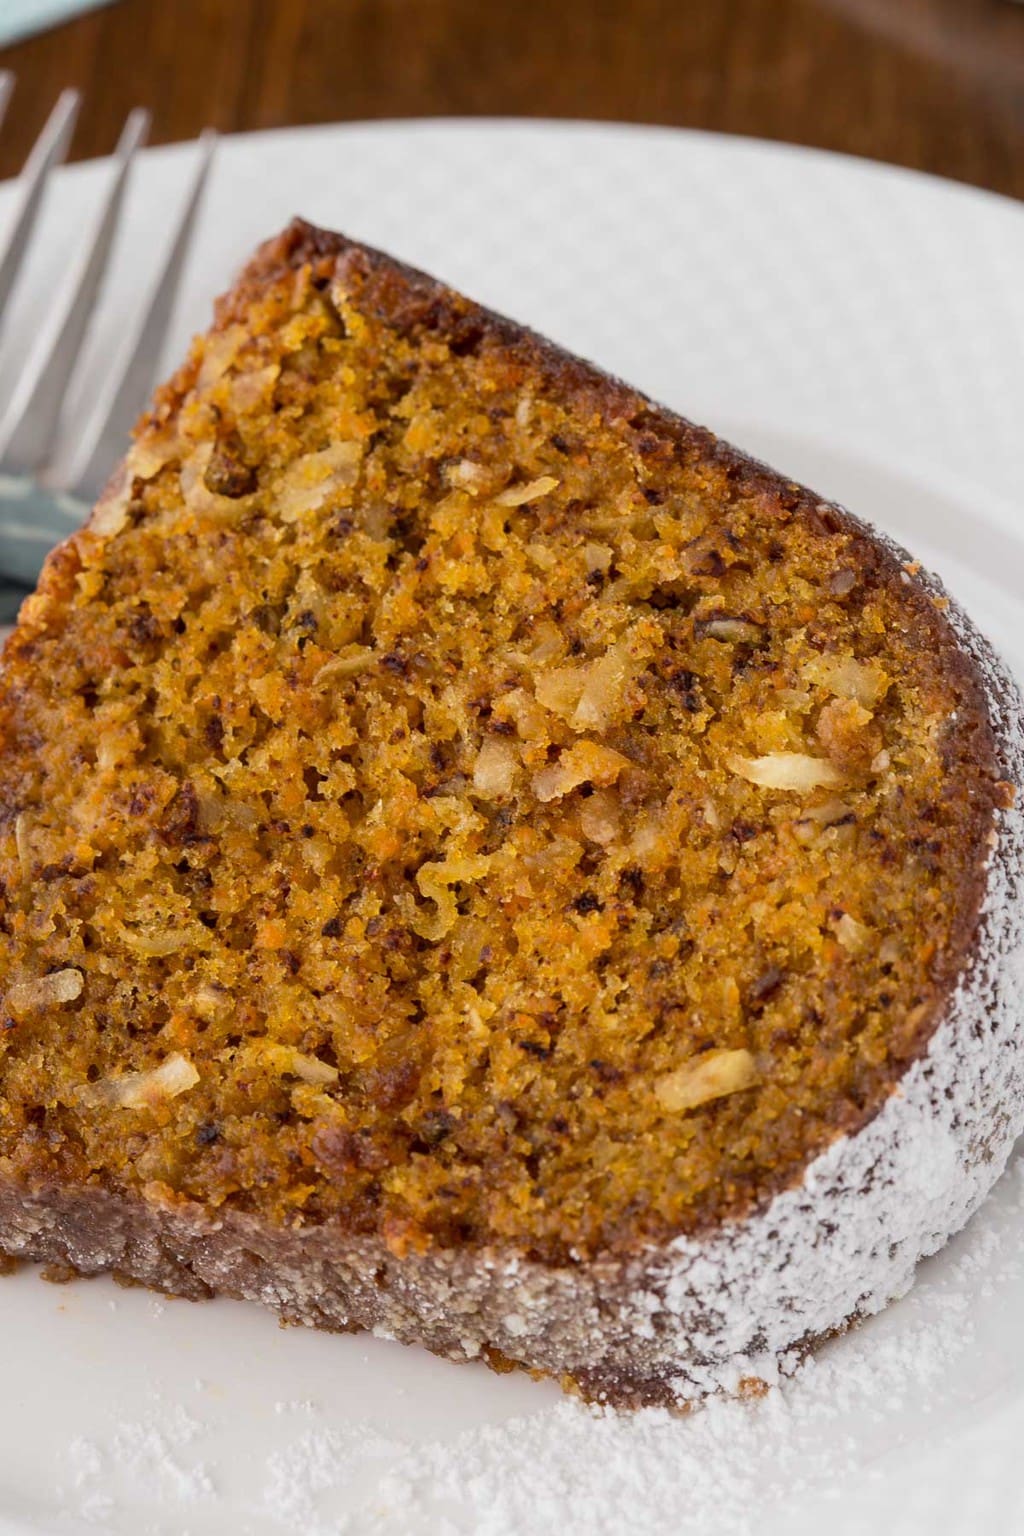 Closeup photo of a slice of Easy Carrot Cake with Buttermilk Glaze on a white serving plate.